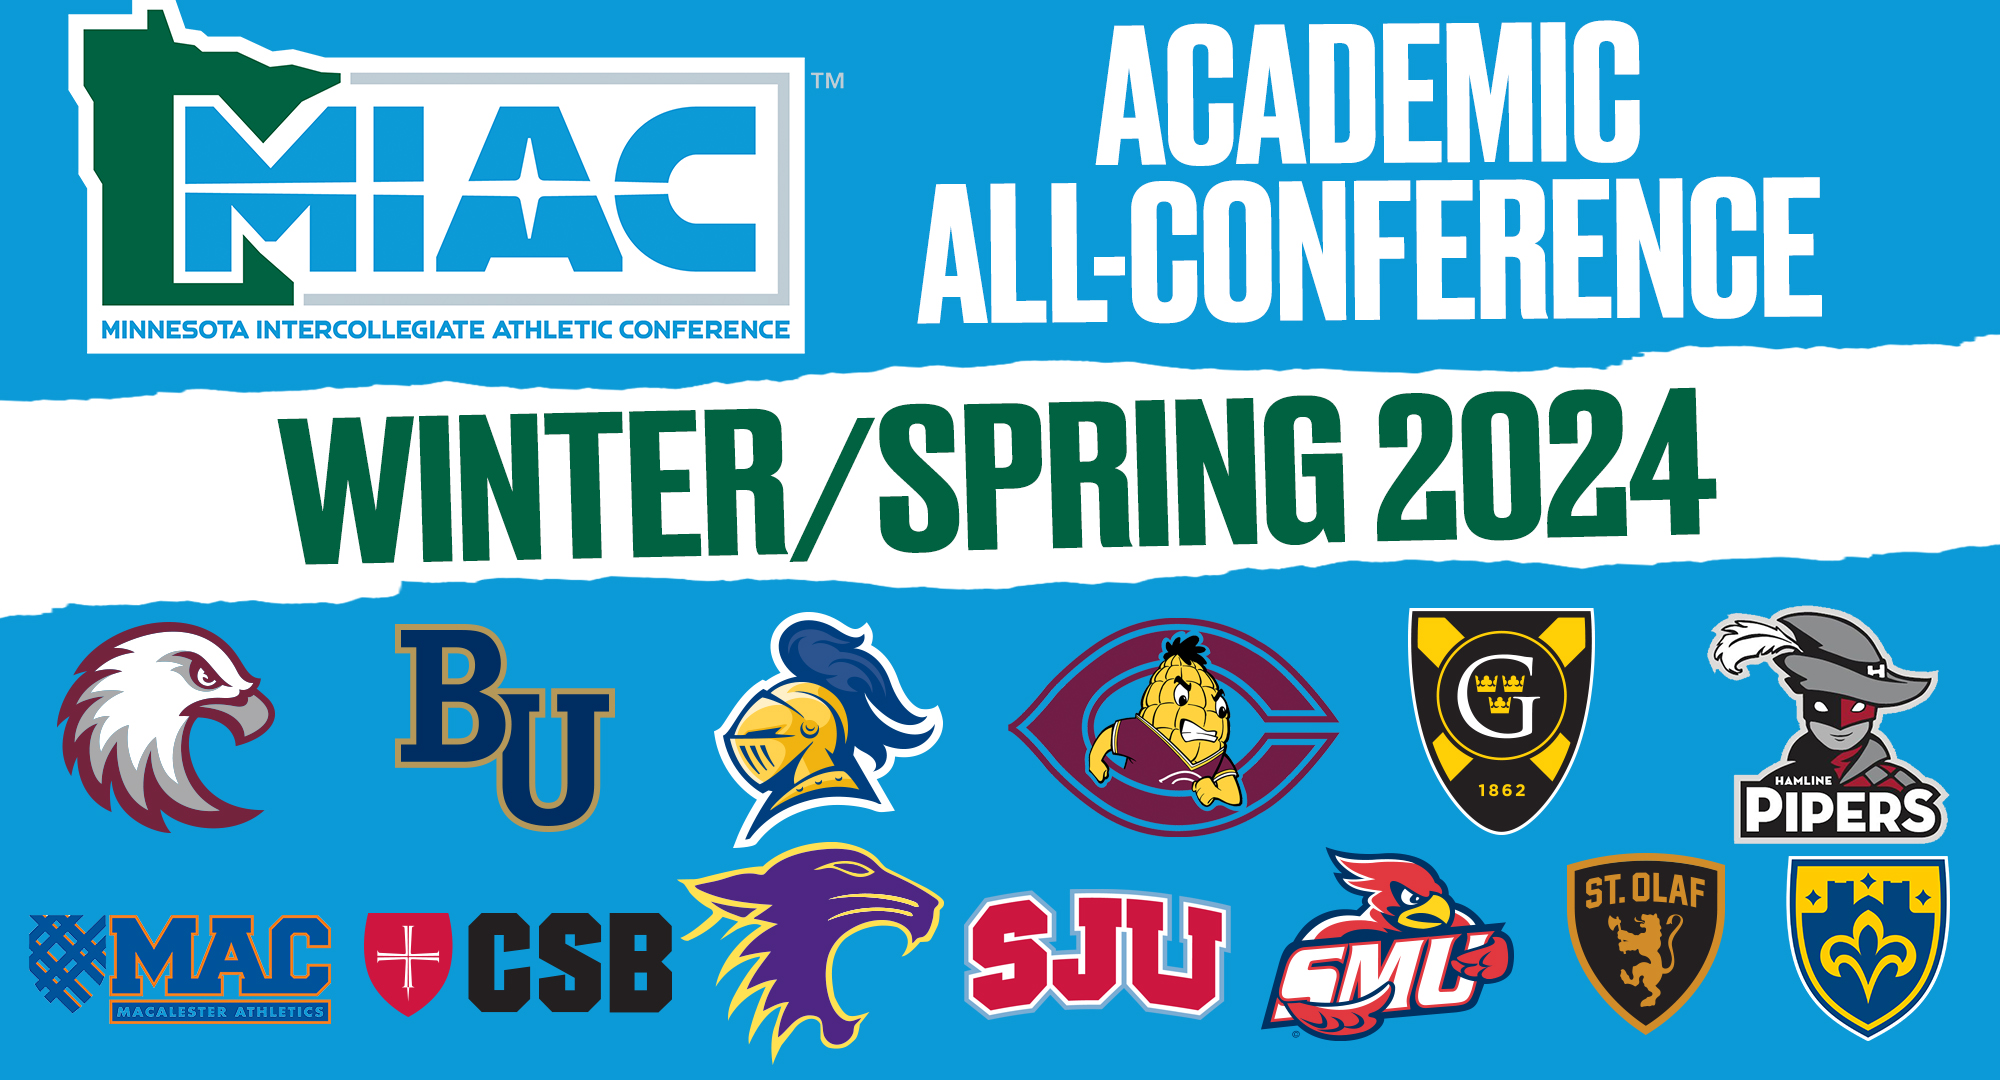 Concordia had 94 student-athletes from the winter and spring seasons earn MIAC Academic All-Conference honors.